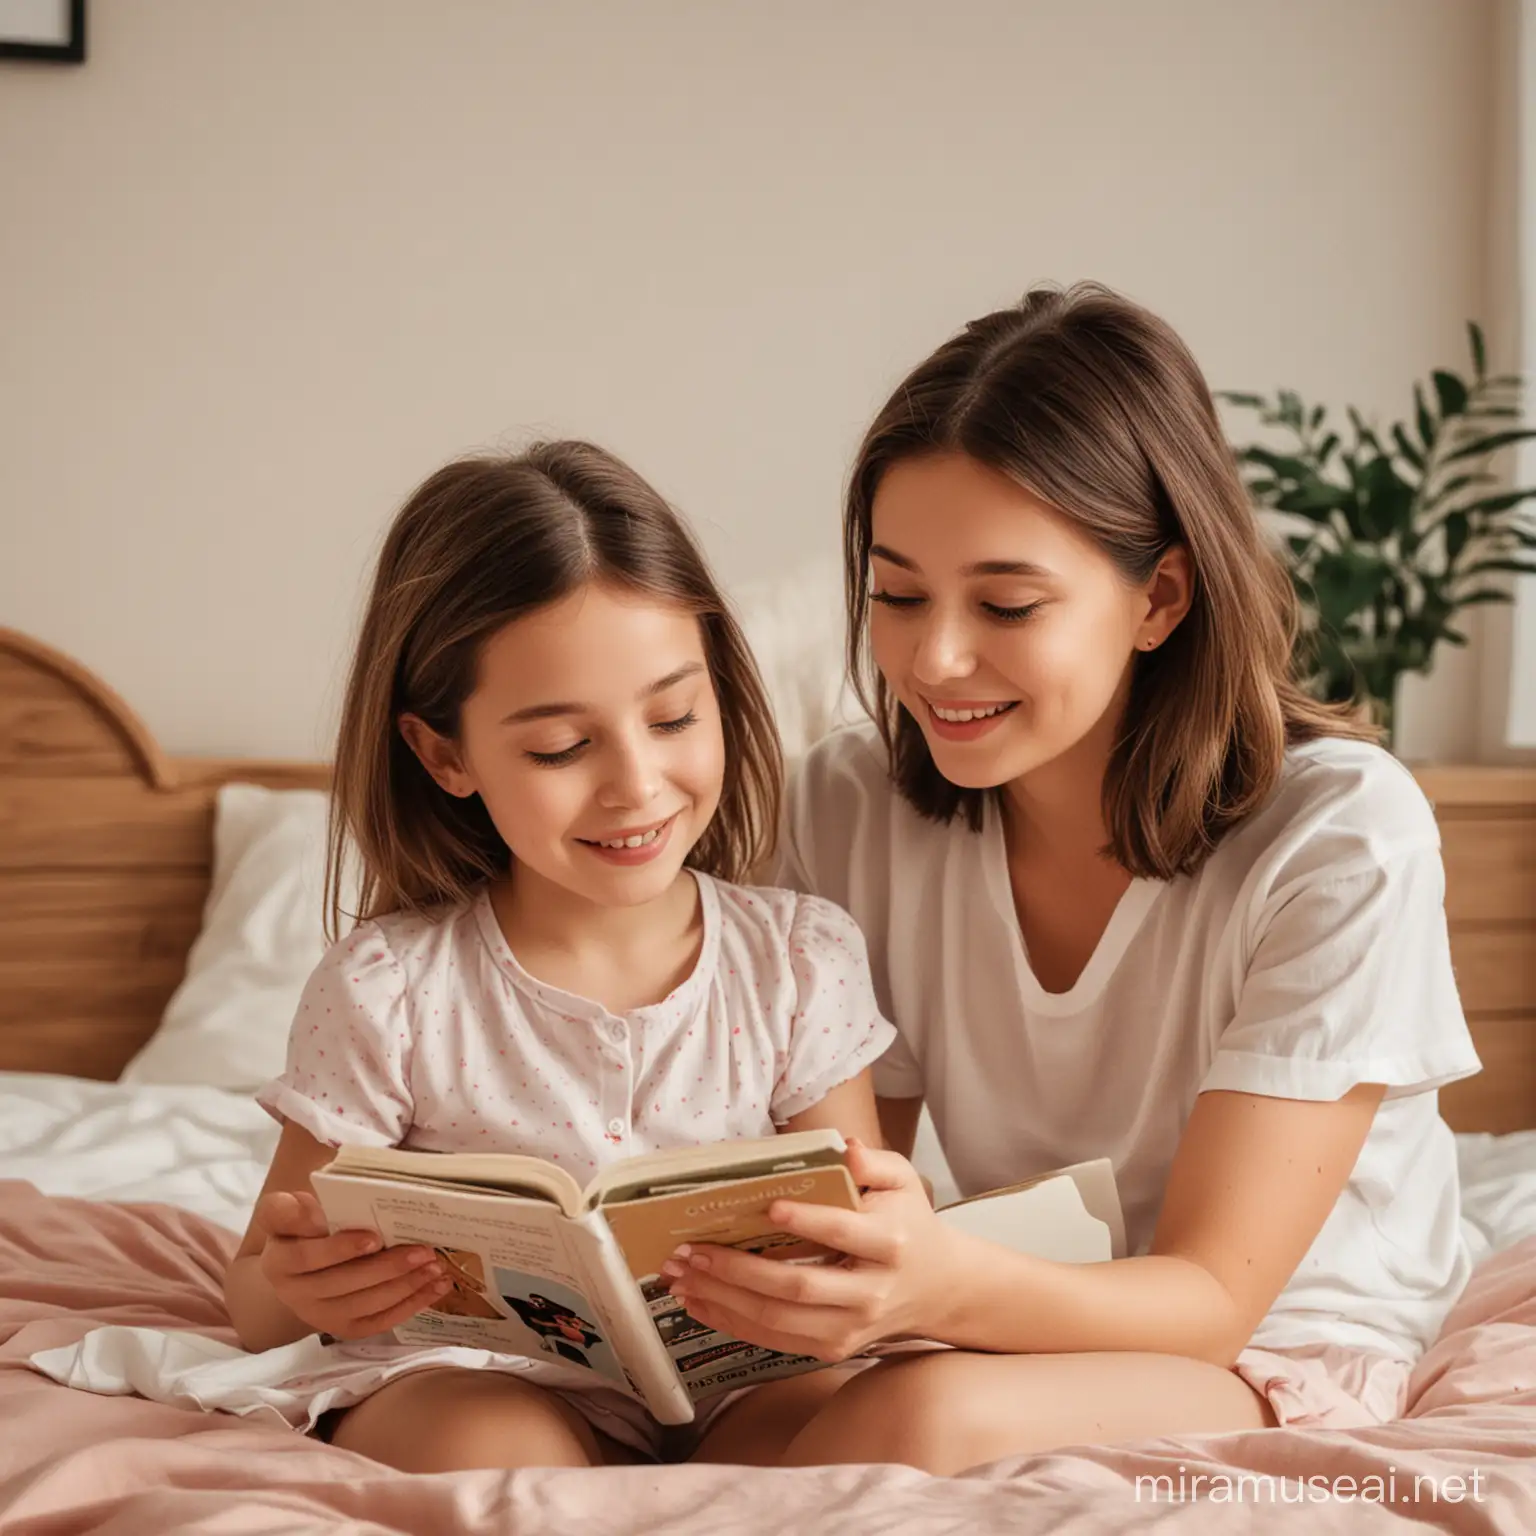 Hey AI, can you generate a captivating background for our Instagram story introducing our page dedicated to sharing heartwarming stories for parents to read to their children?